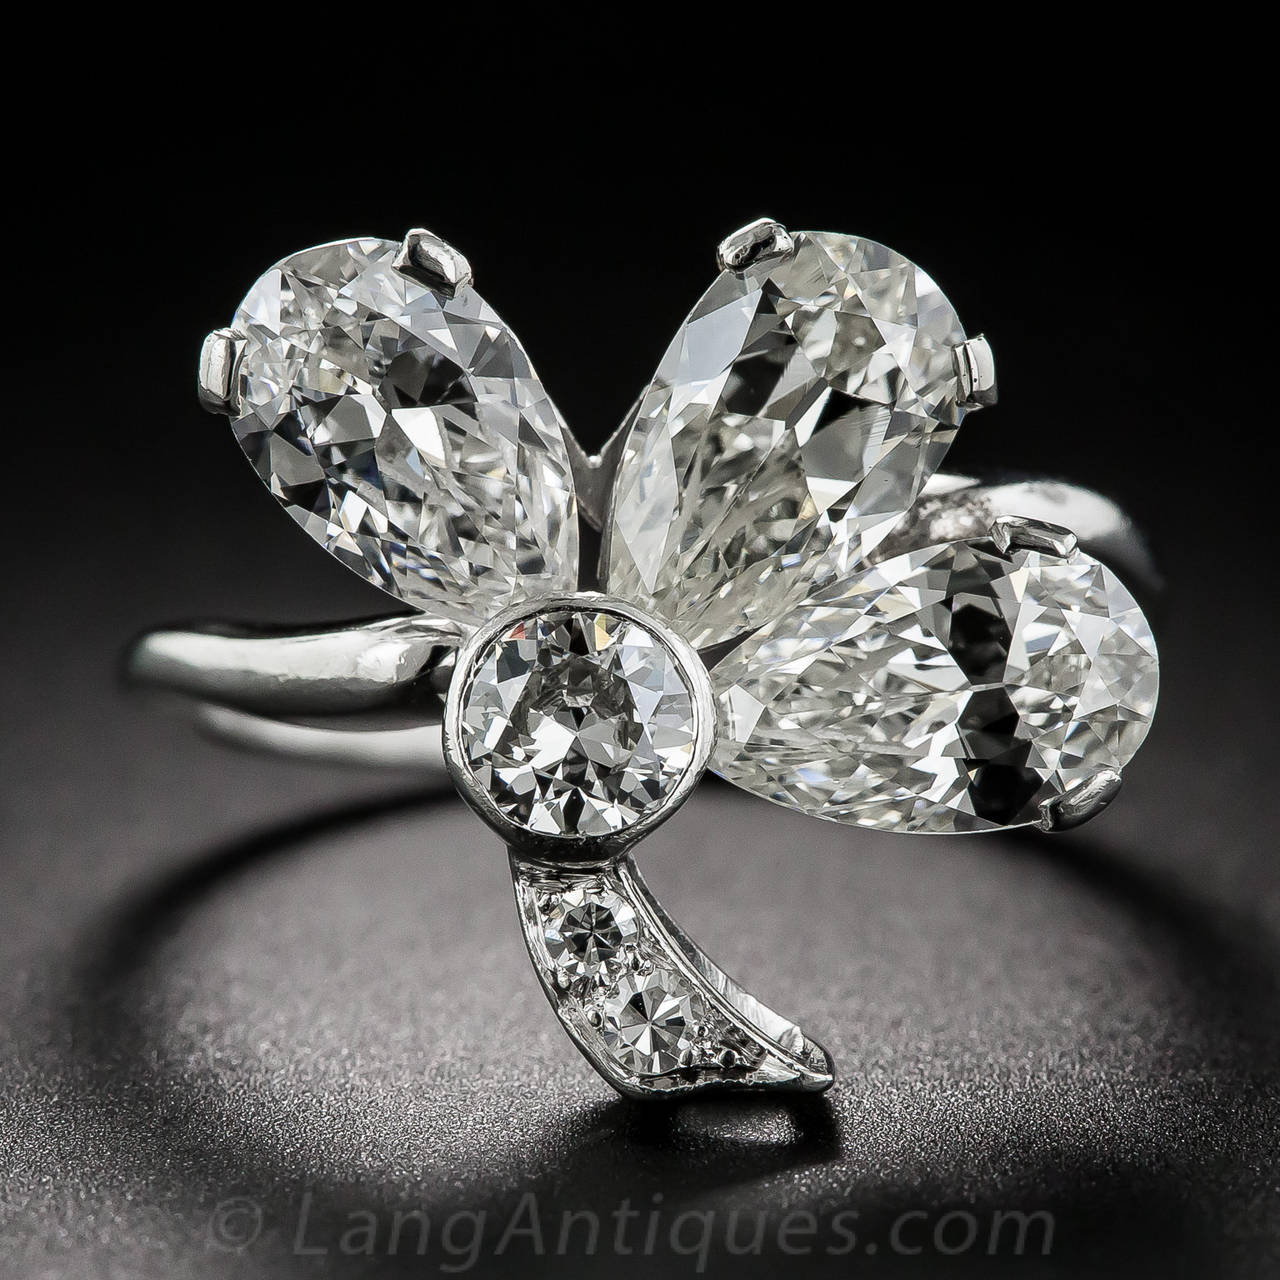 A tantalizing trio of bright-white, pear-shaped diamonds, totaling 3.00 carats, produces a powerful punch, not to mention the luck of the Irish, in this truly gorgeous three-leaf clover ring, handcrafted in platinum - circa 1930. The resplendent